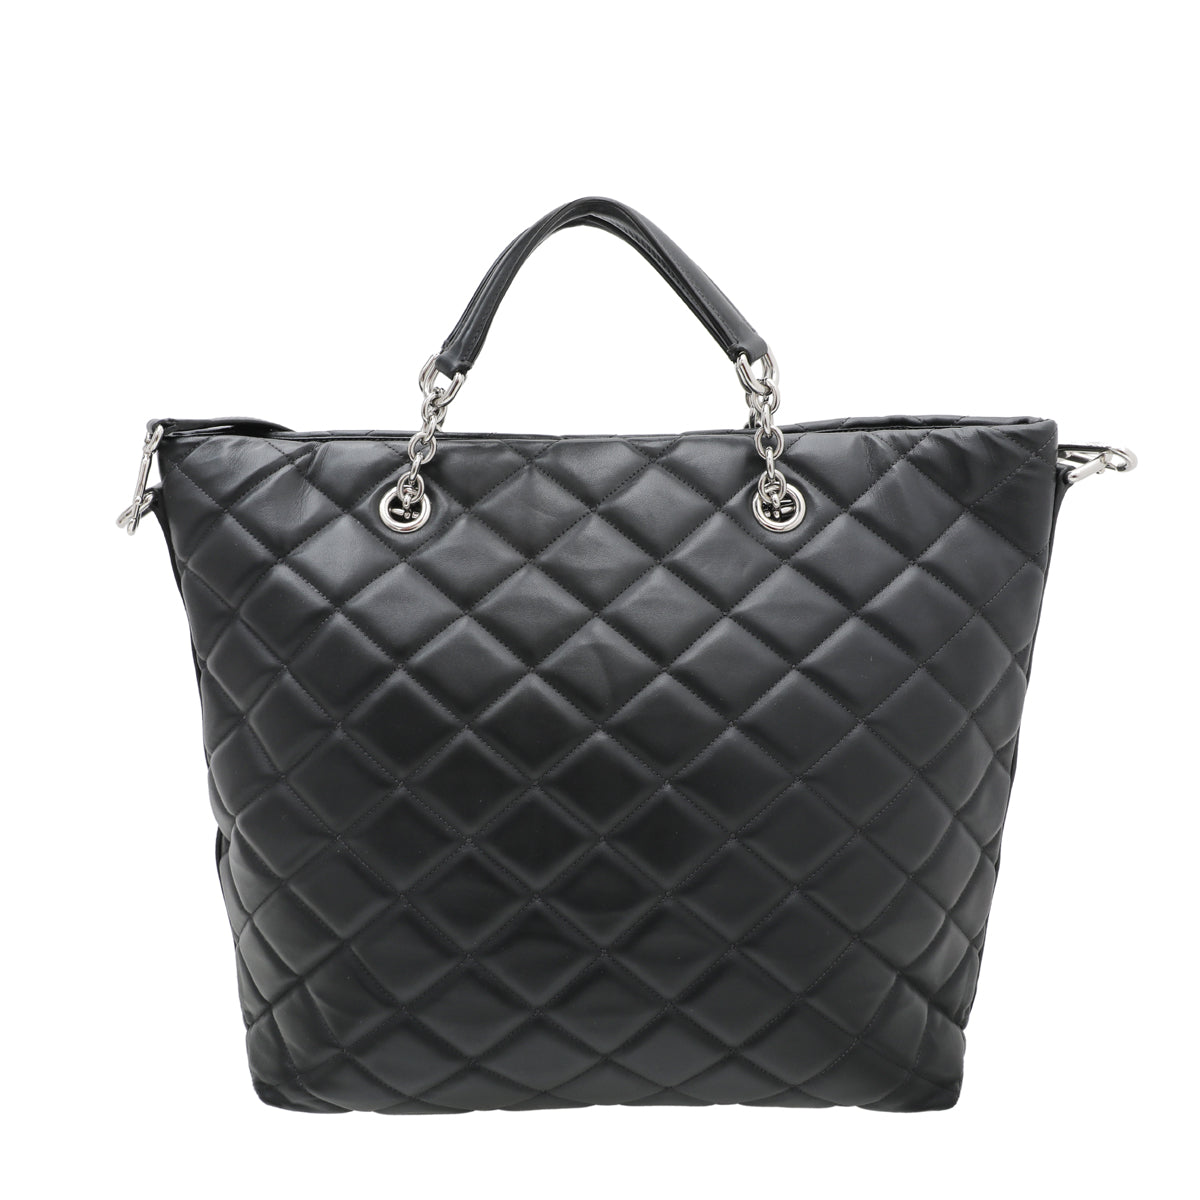 Dolce & Gabbana Black Quilted Miss Kate Shopping Tote Bag